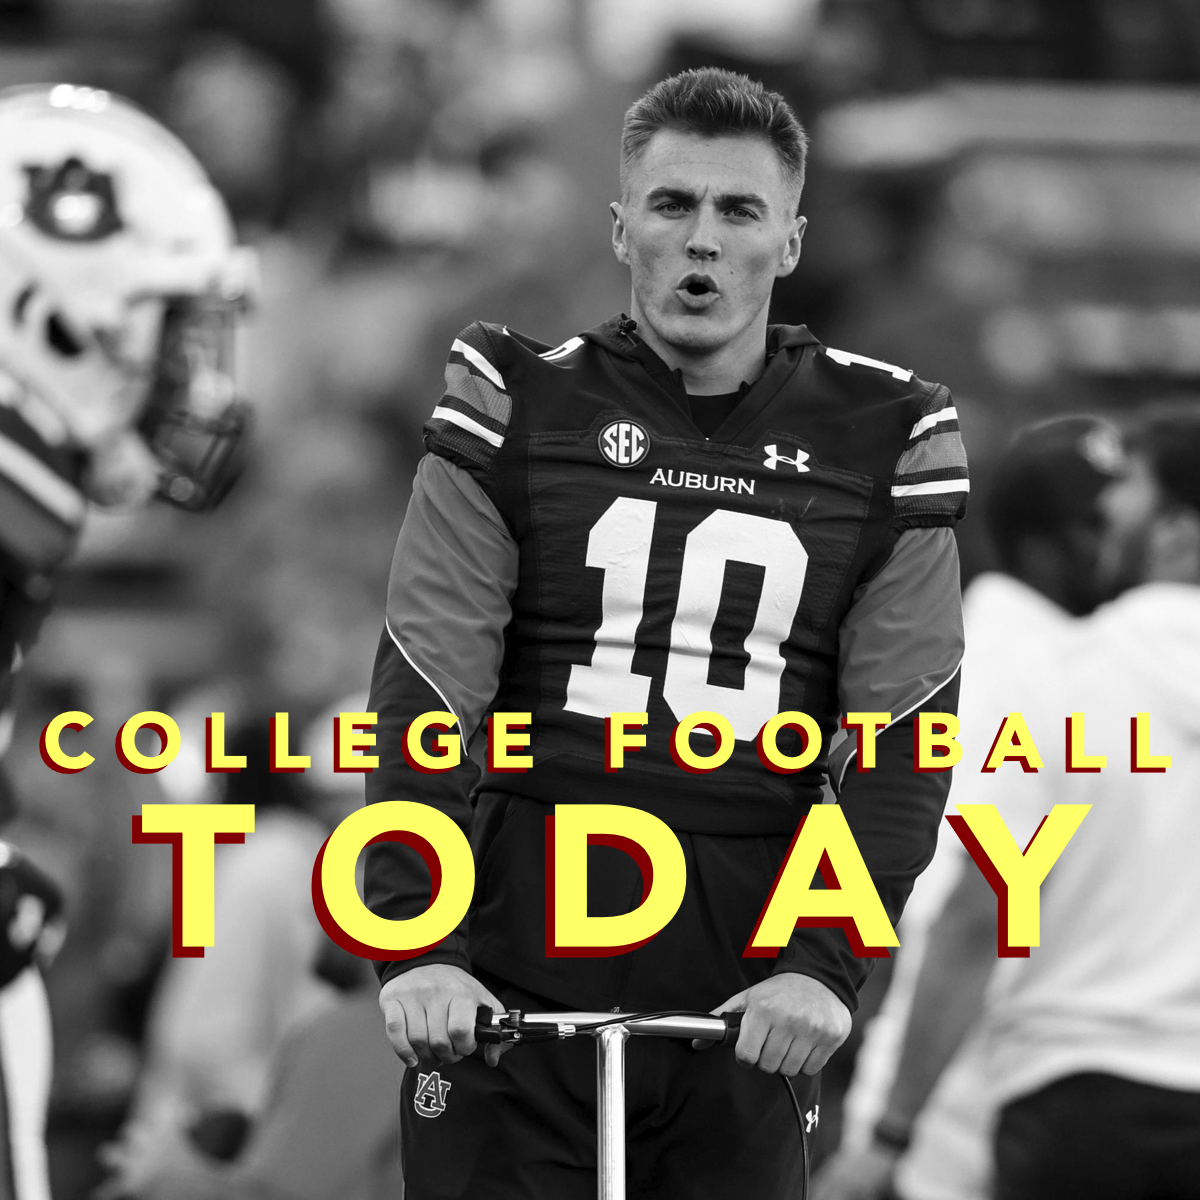 Thoughts: College Football Today